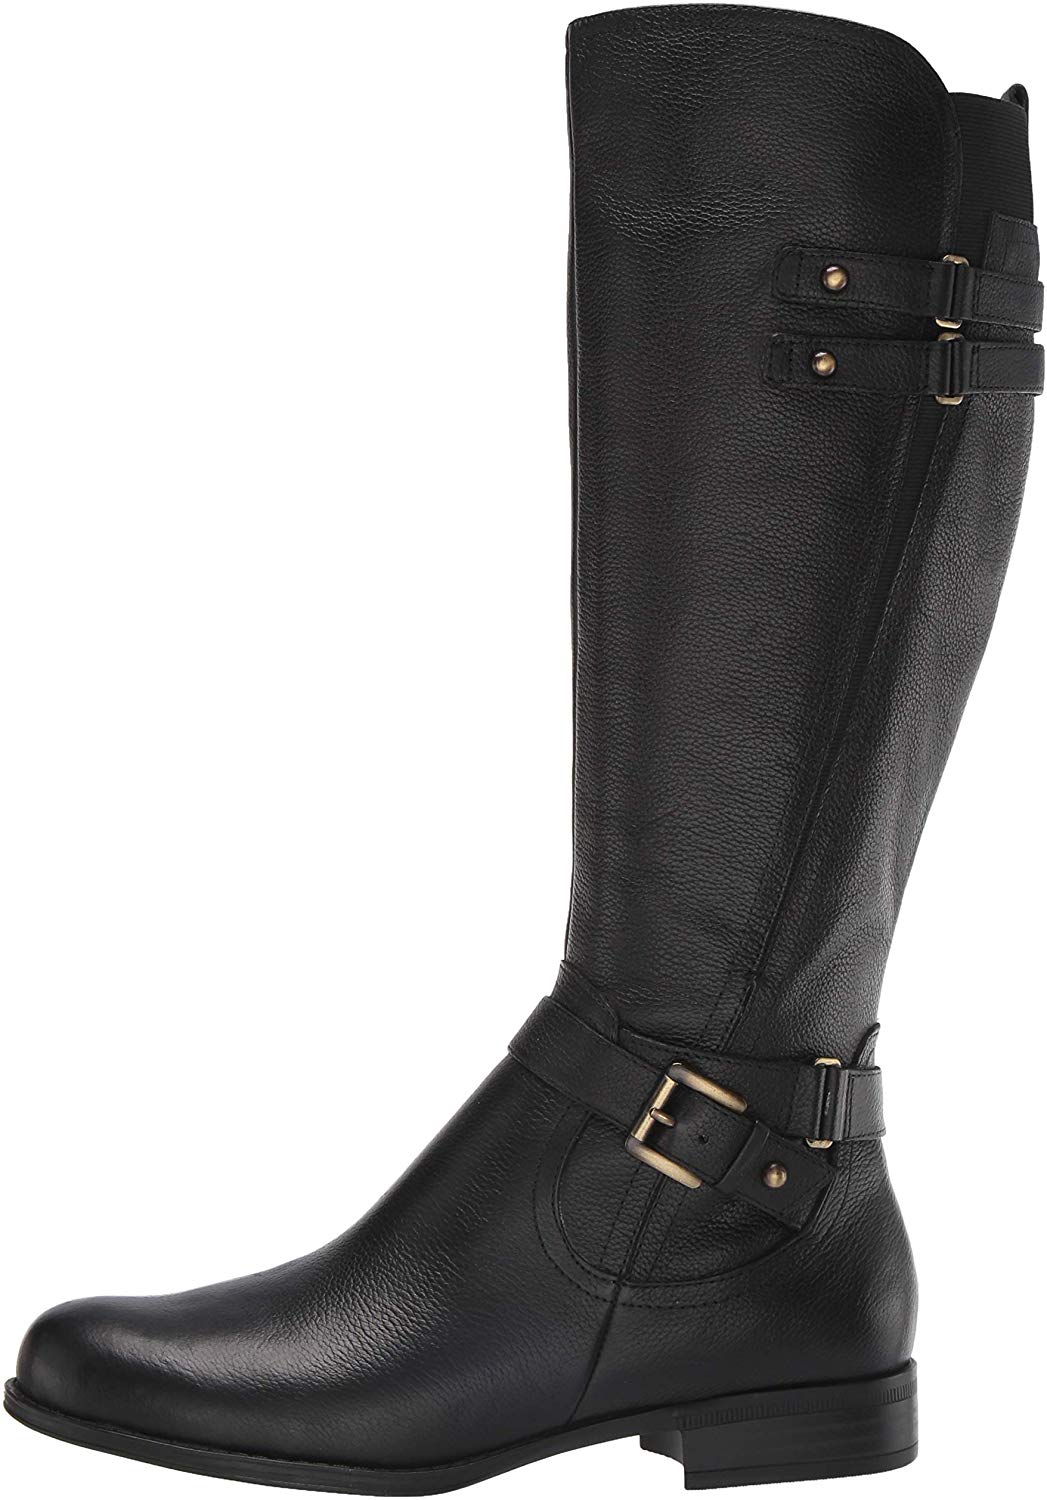 Naturalizer Women's Jackie Knee High Boot, Black Leather, Size 6.5 gUUp ...